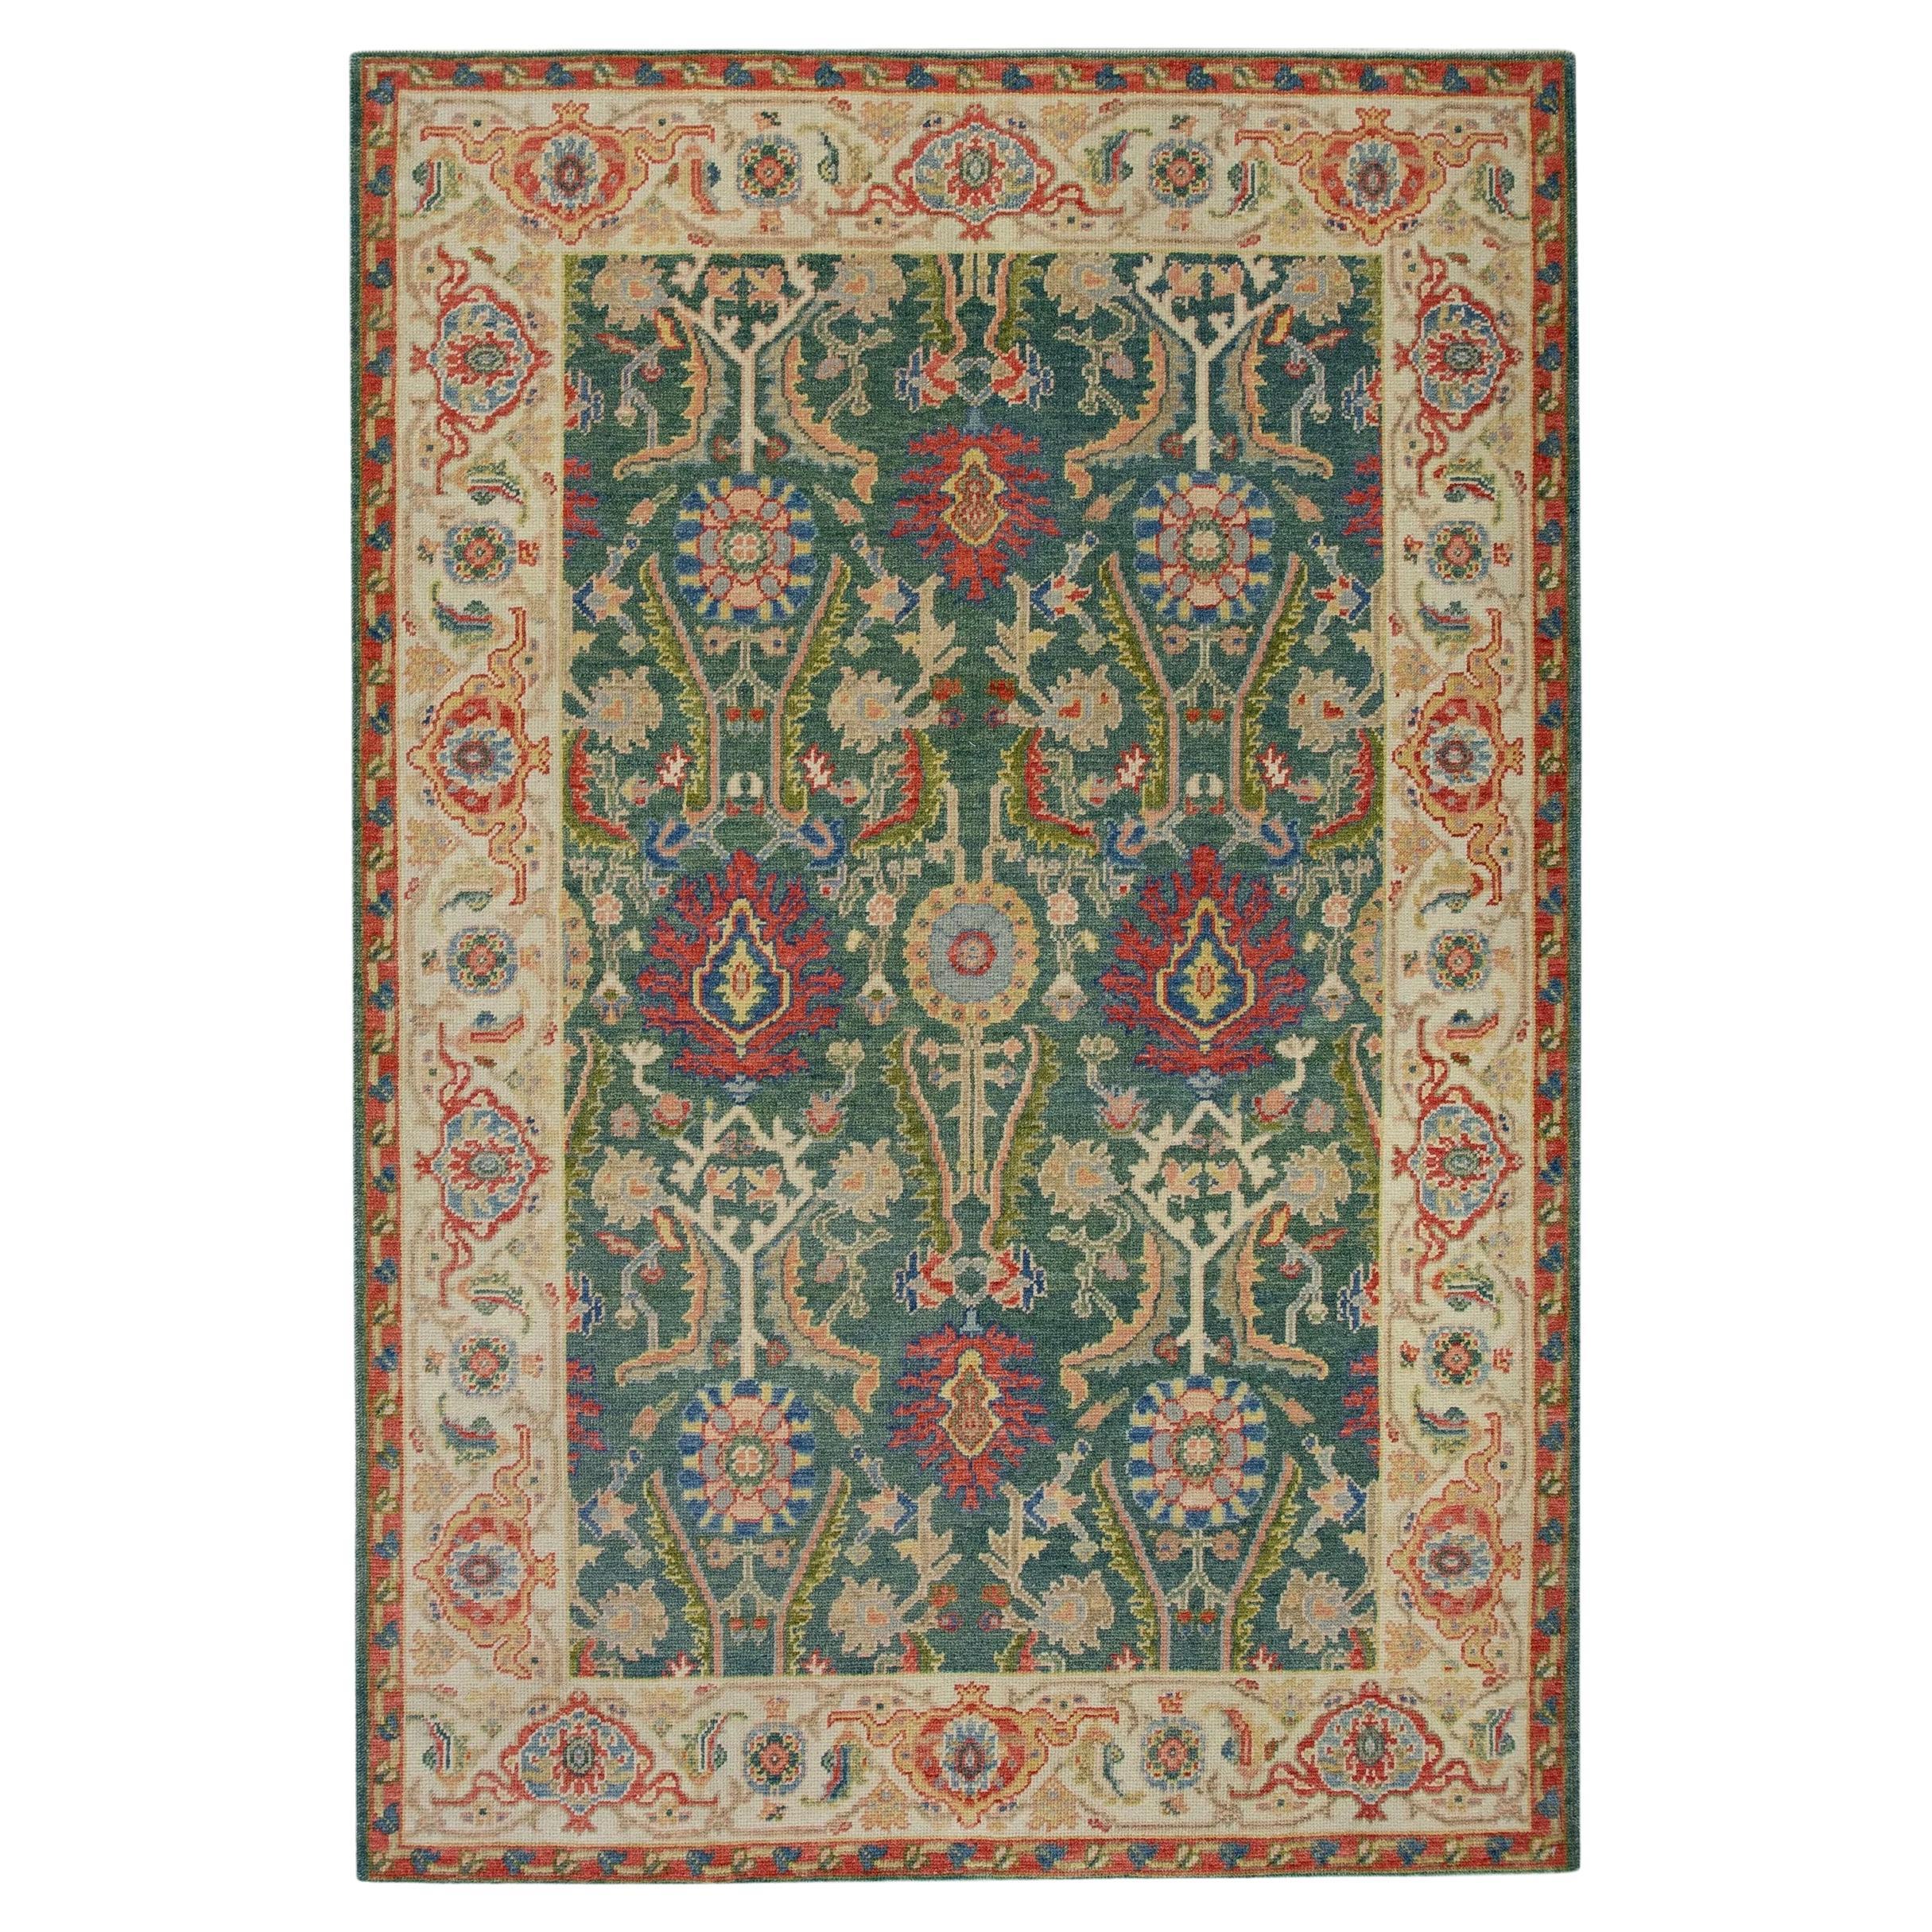 Green & Red Floral Design Handwoven Wool Turkish Finewoven Oushak Rug 4'3 x 6'3 For Sale